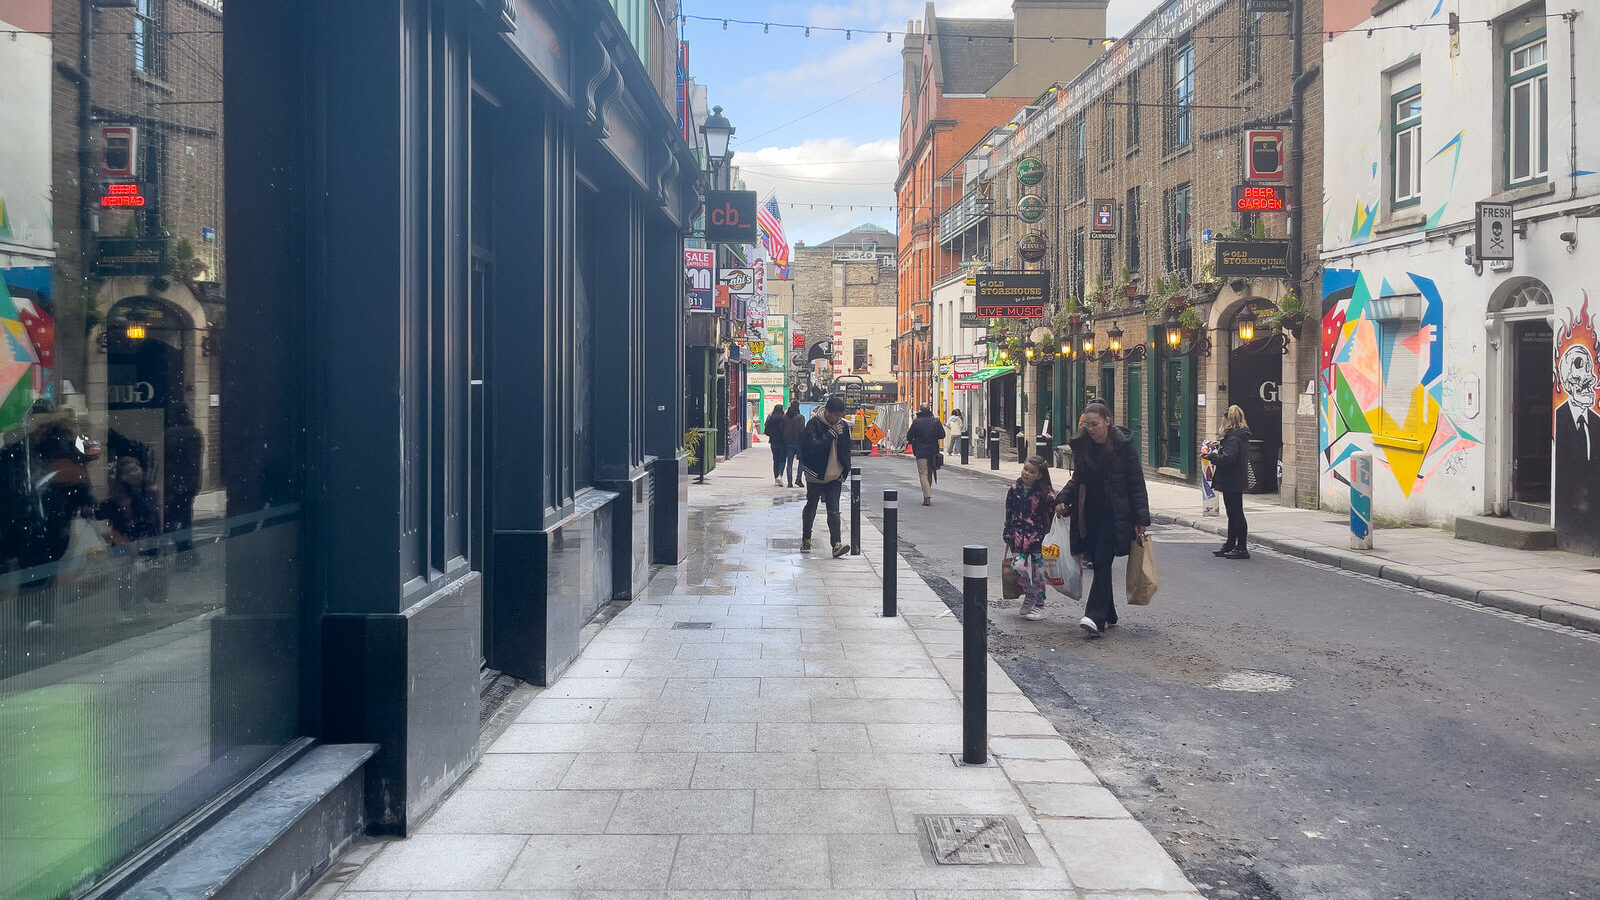 VISITING DUBLIN FOR ST PATRICK'S WEEKEND [IS TEMPLE BAR AS GOOD AS MANY CLAIM IT TO BE?]-229501-1